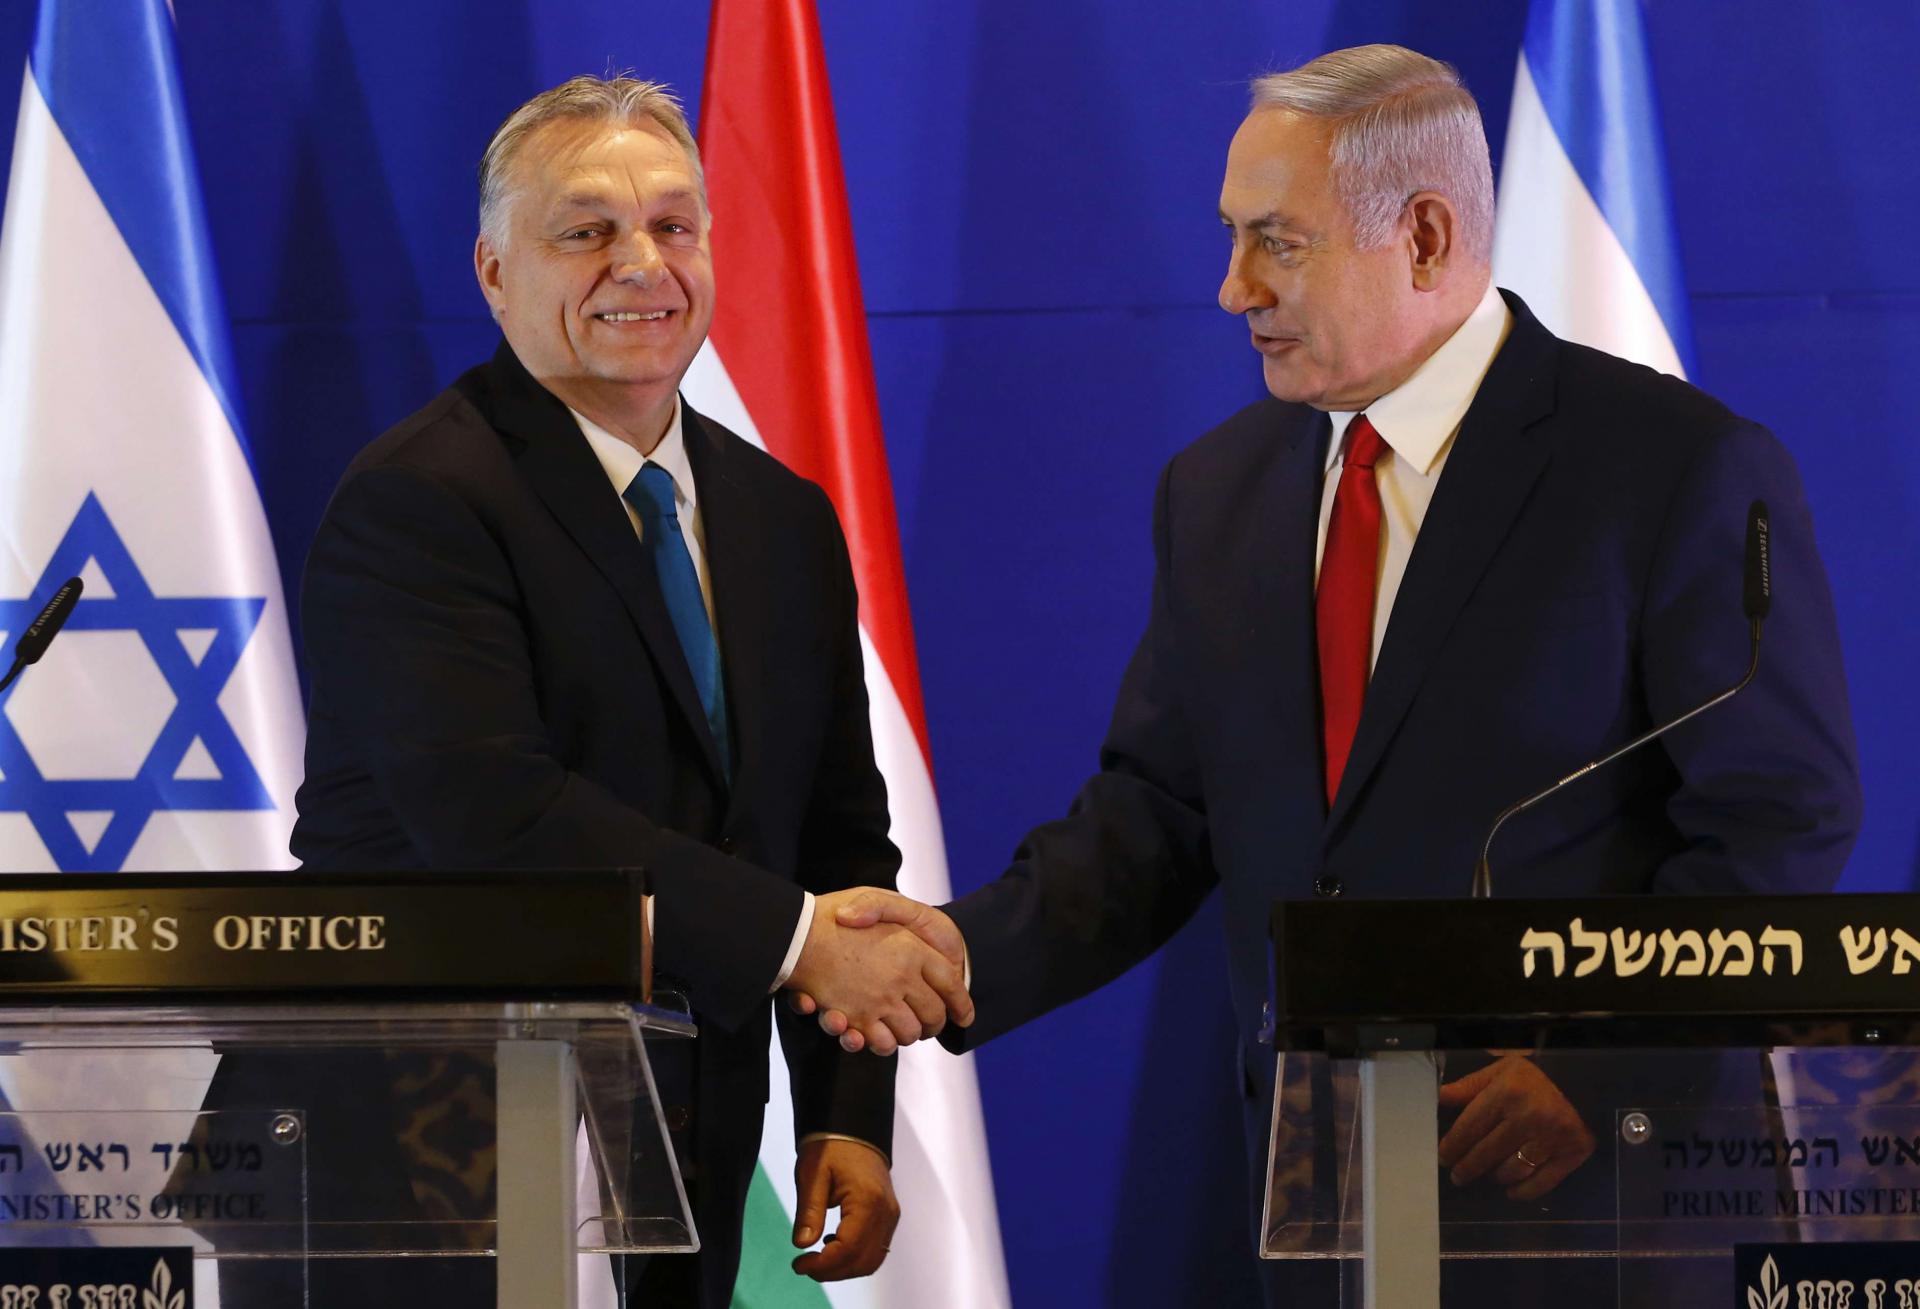 Hungarian Prime Minister Viktor Orban (L) and Israeli Prime Minister Benjamin Netanyahu shake hands during a press conference after their meeting in Jerusalem on February 19, 2019.